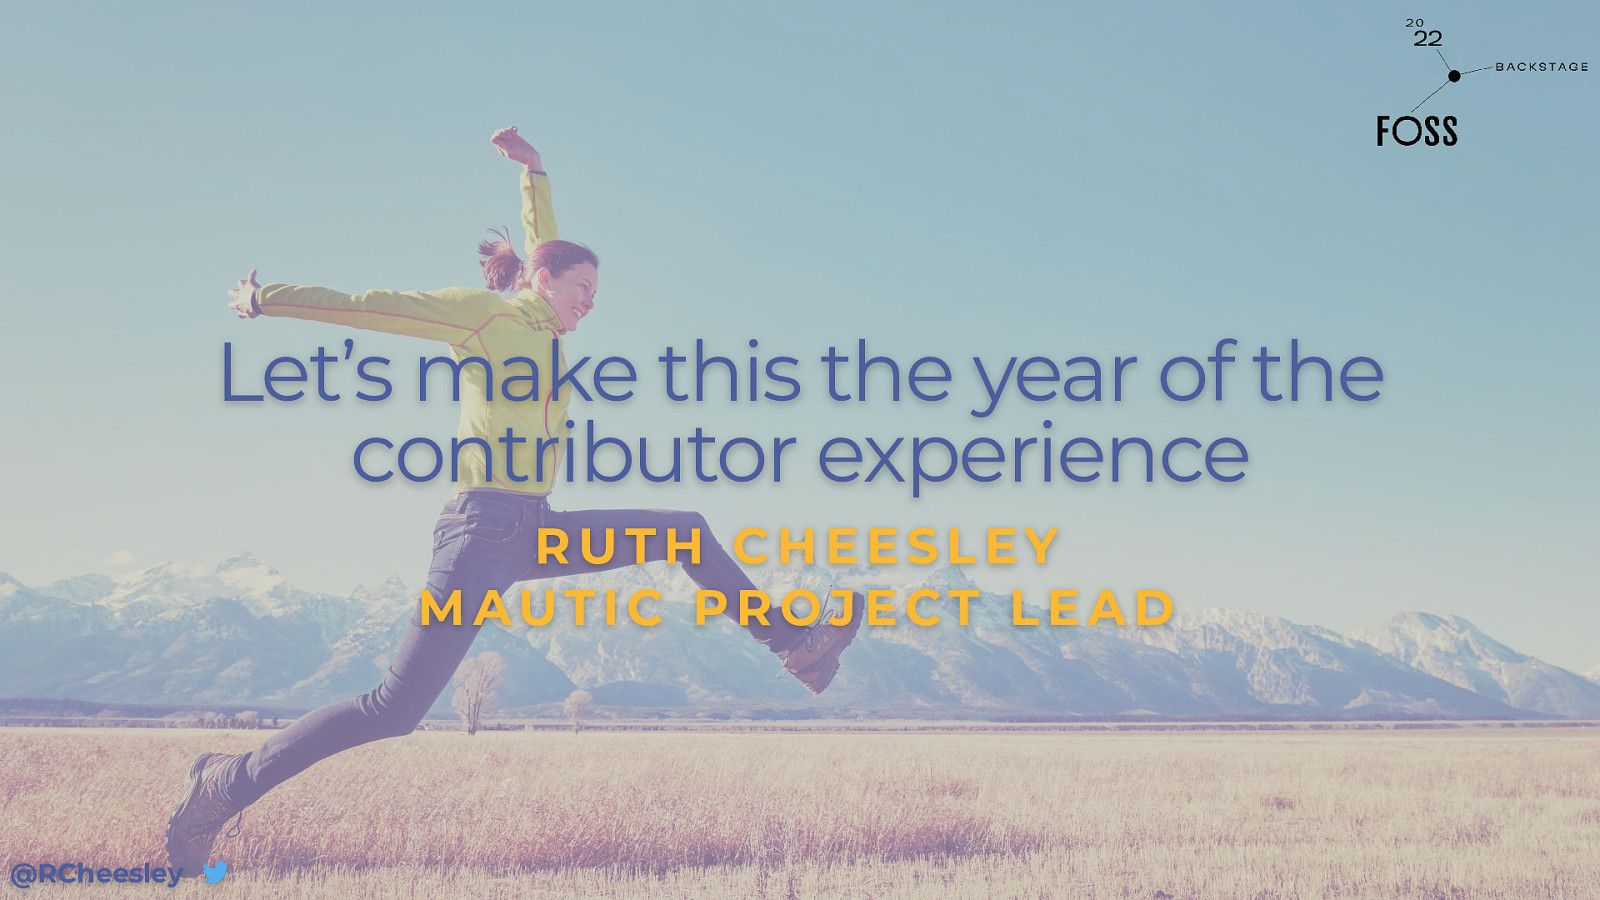 Let’s make this the year of the contributor experience!